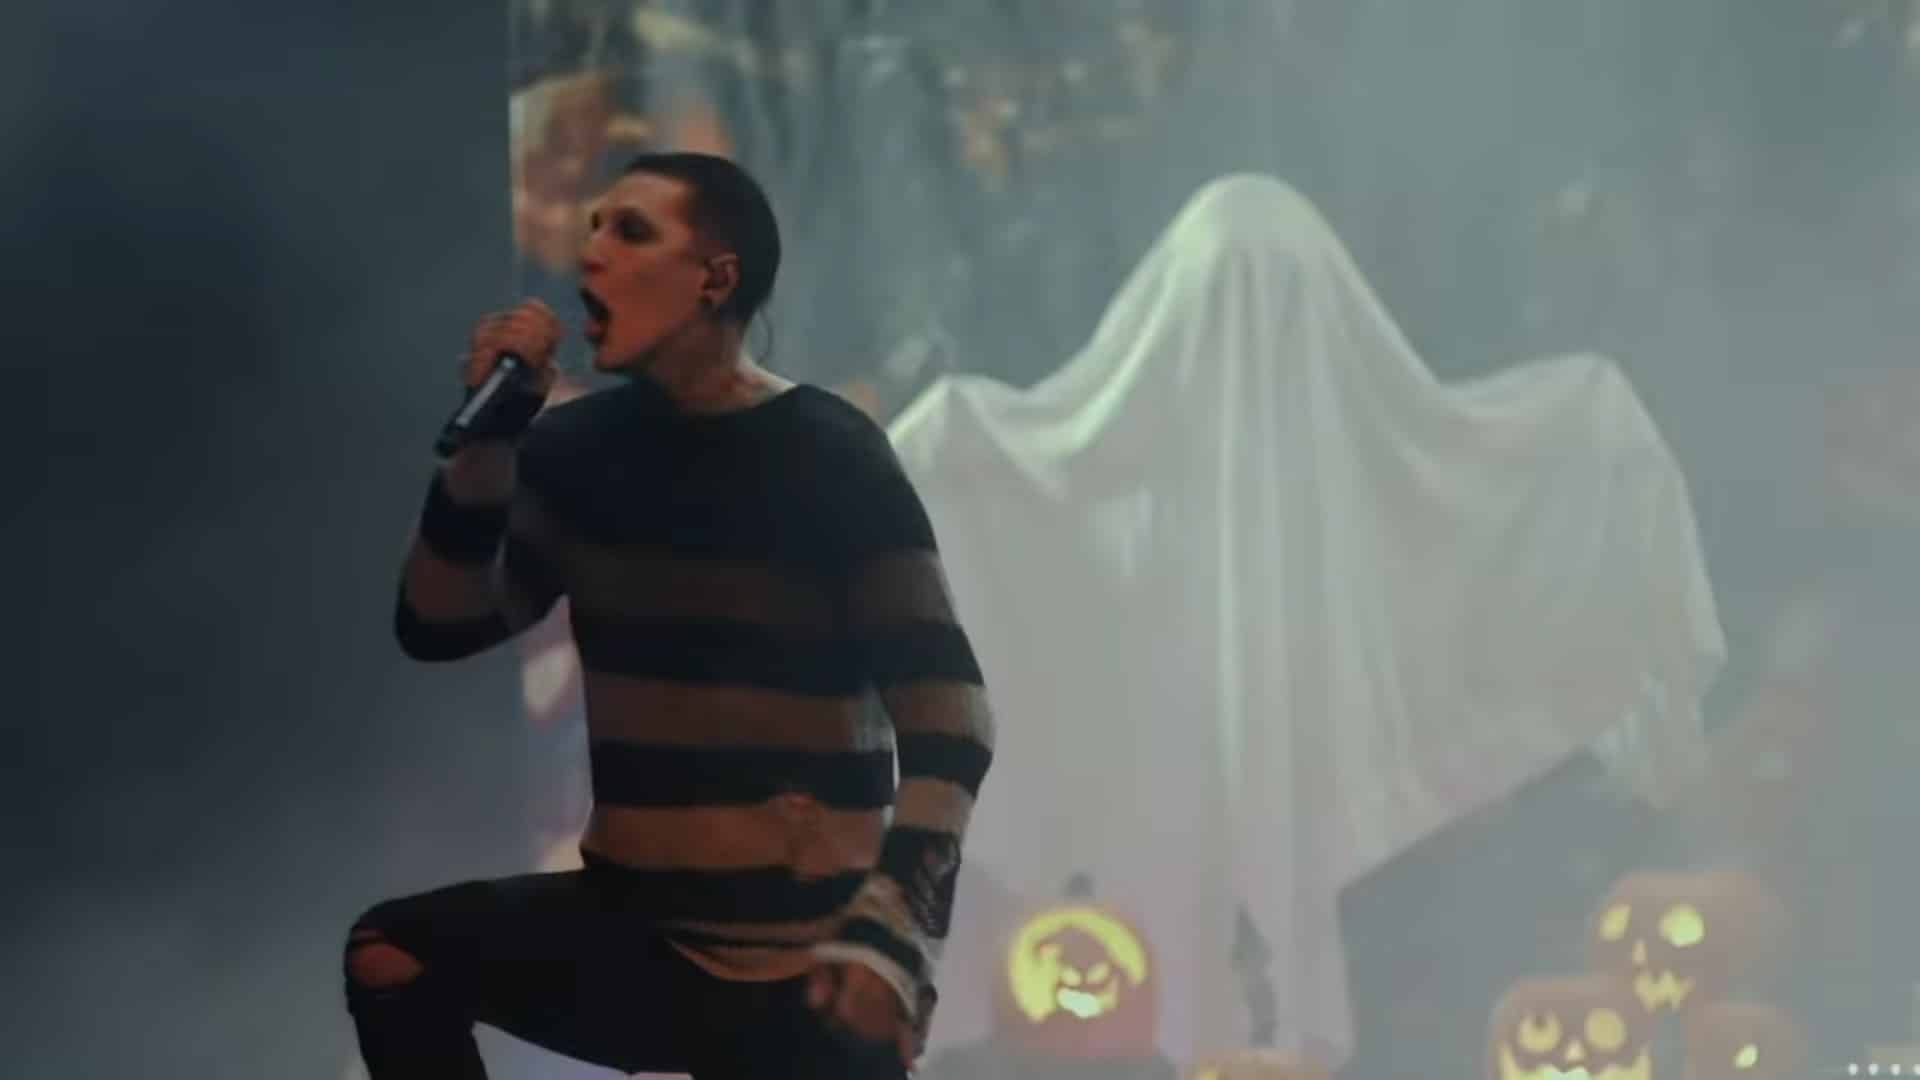 motionless in white livevideo 2019 news